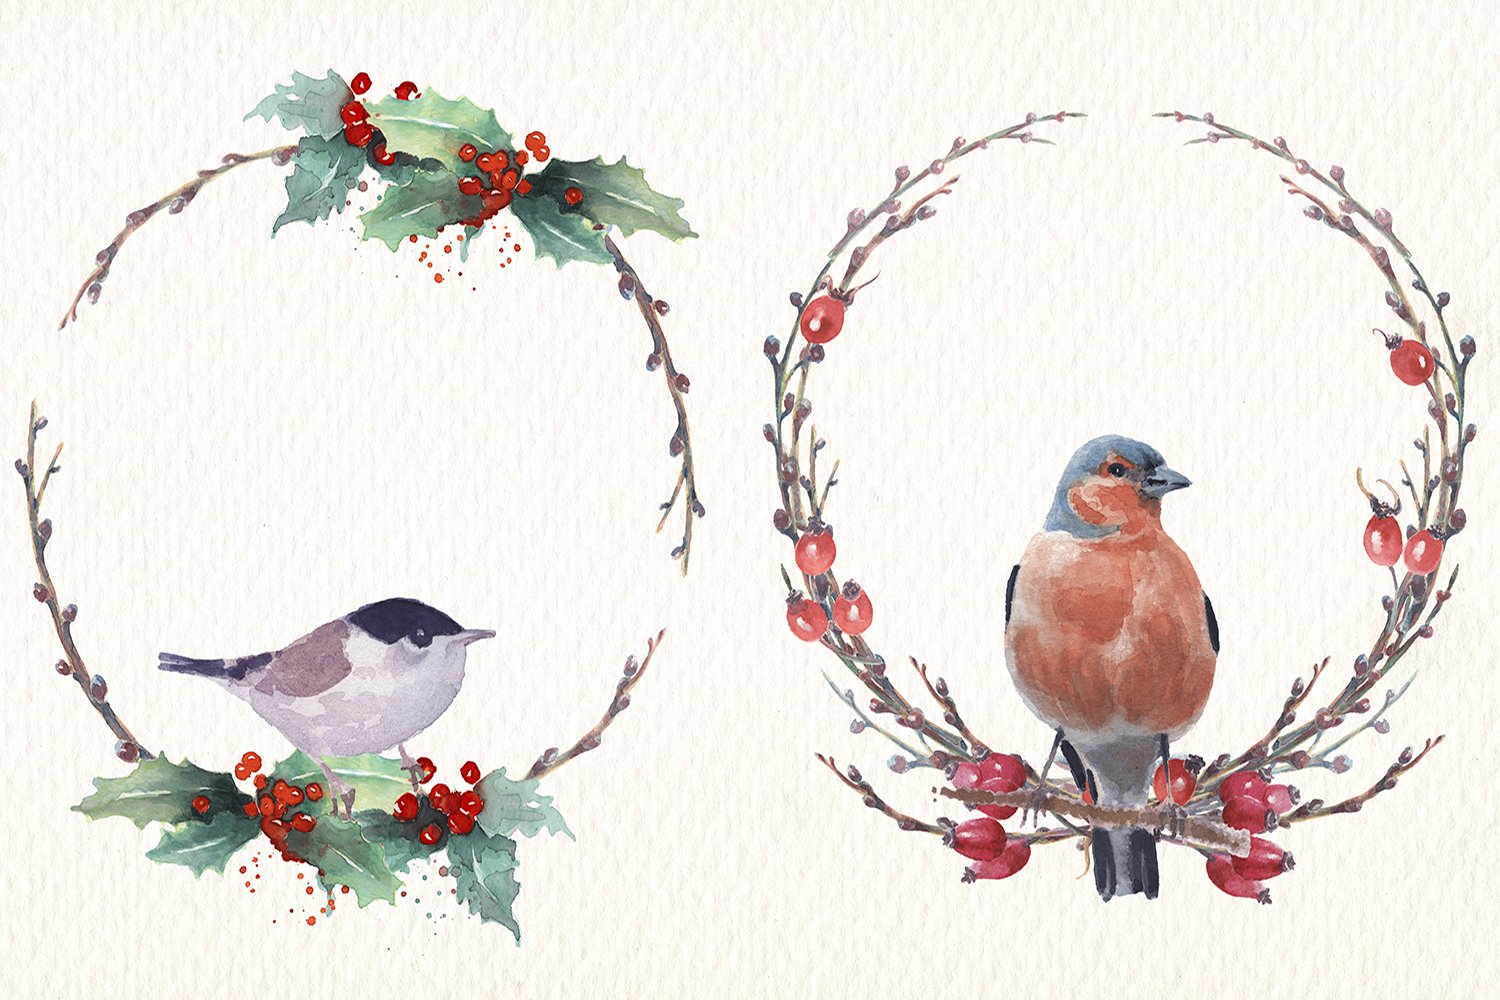 Winter design for your holiday themed projects.